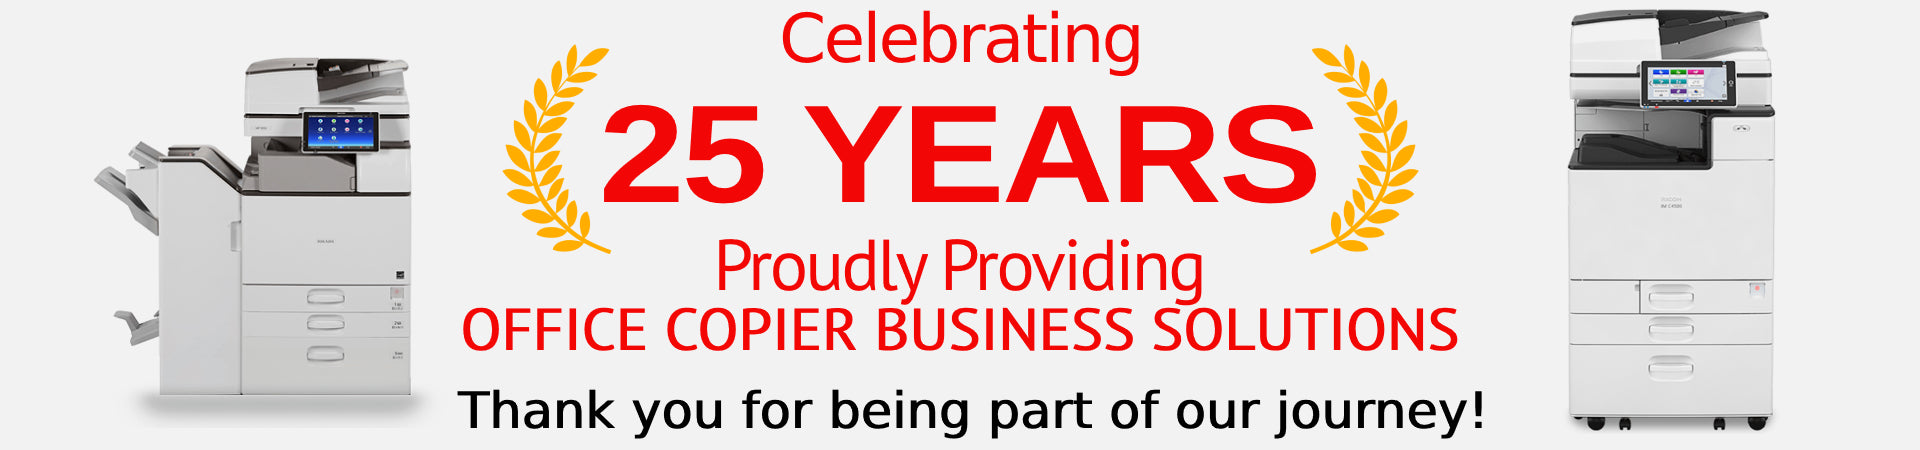 Celebrating 25 Years Proudly Providing Office Copier Business Solutions